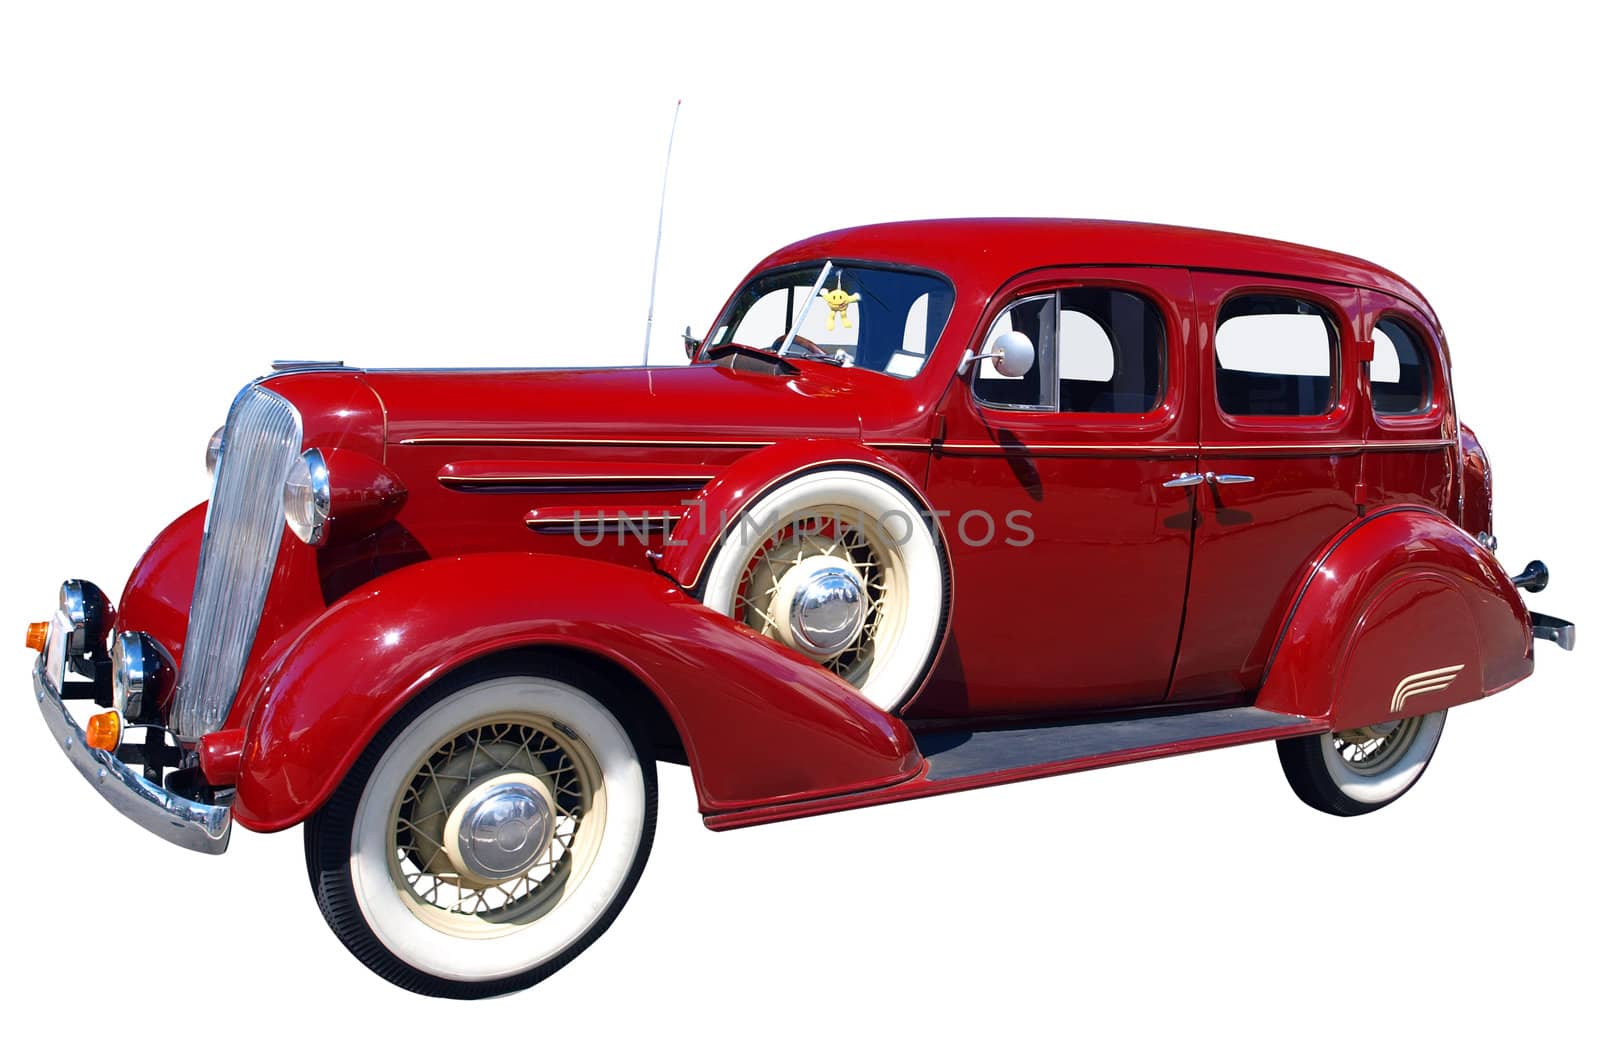 1936 Chevrolet isolated with clipping path      